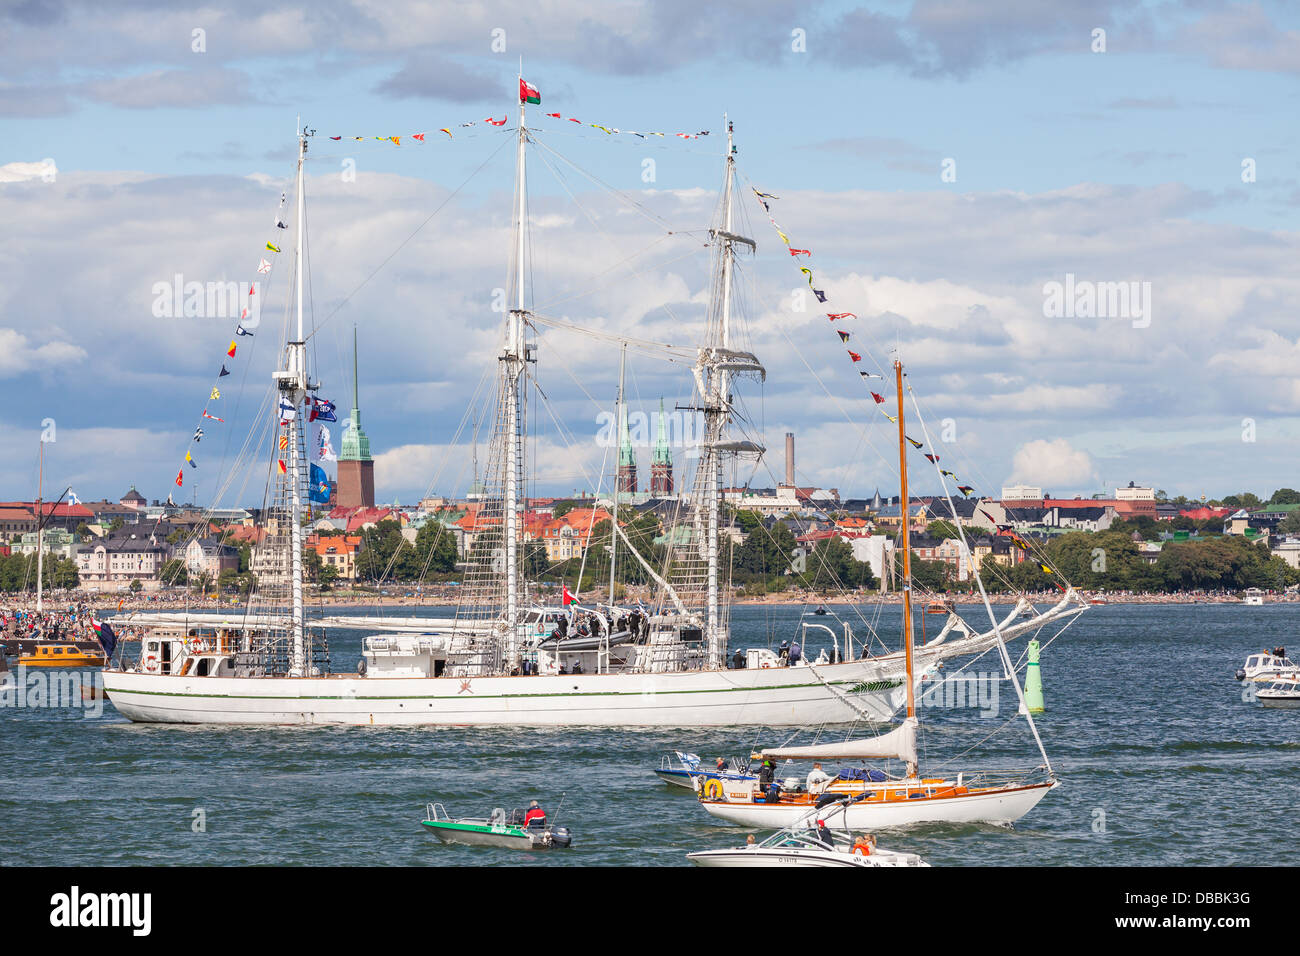 The Tall Ships Races 2013 in Helsinki, Finland Stock Photo